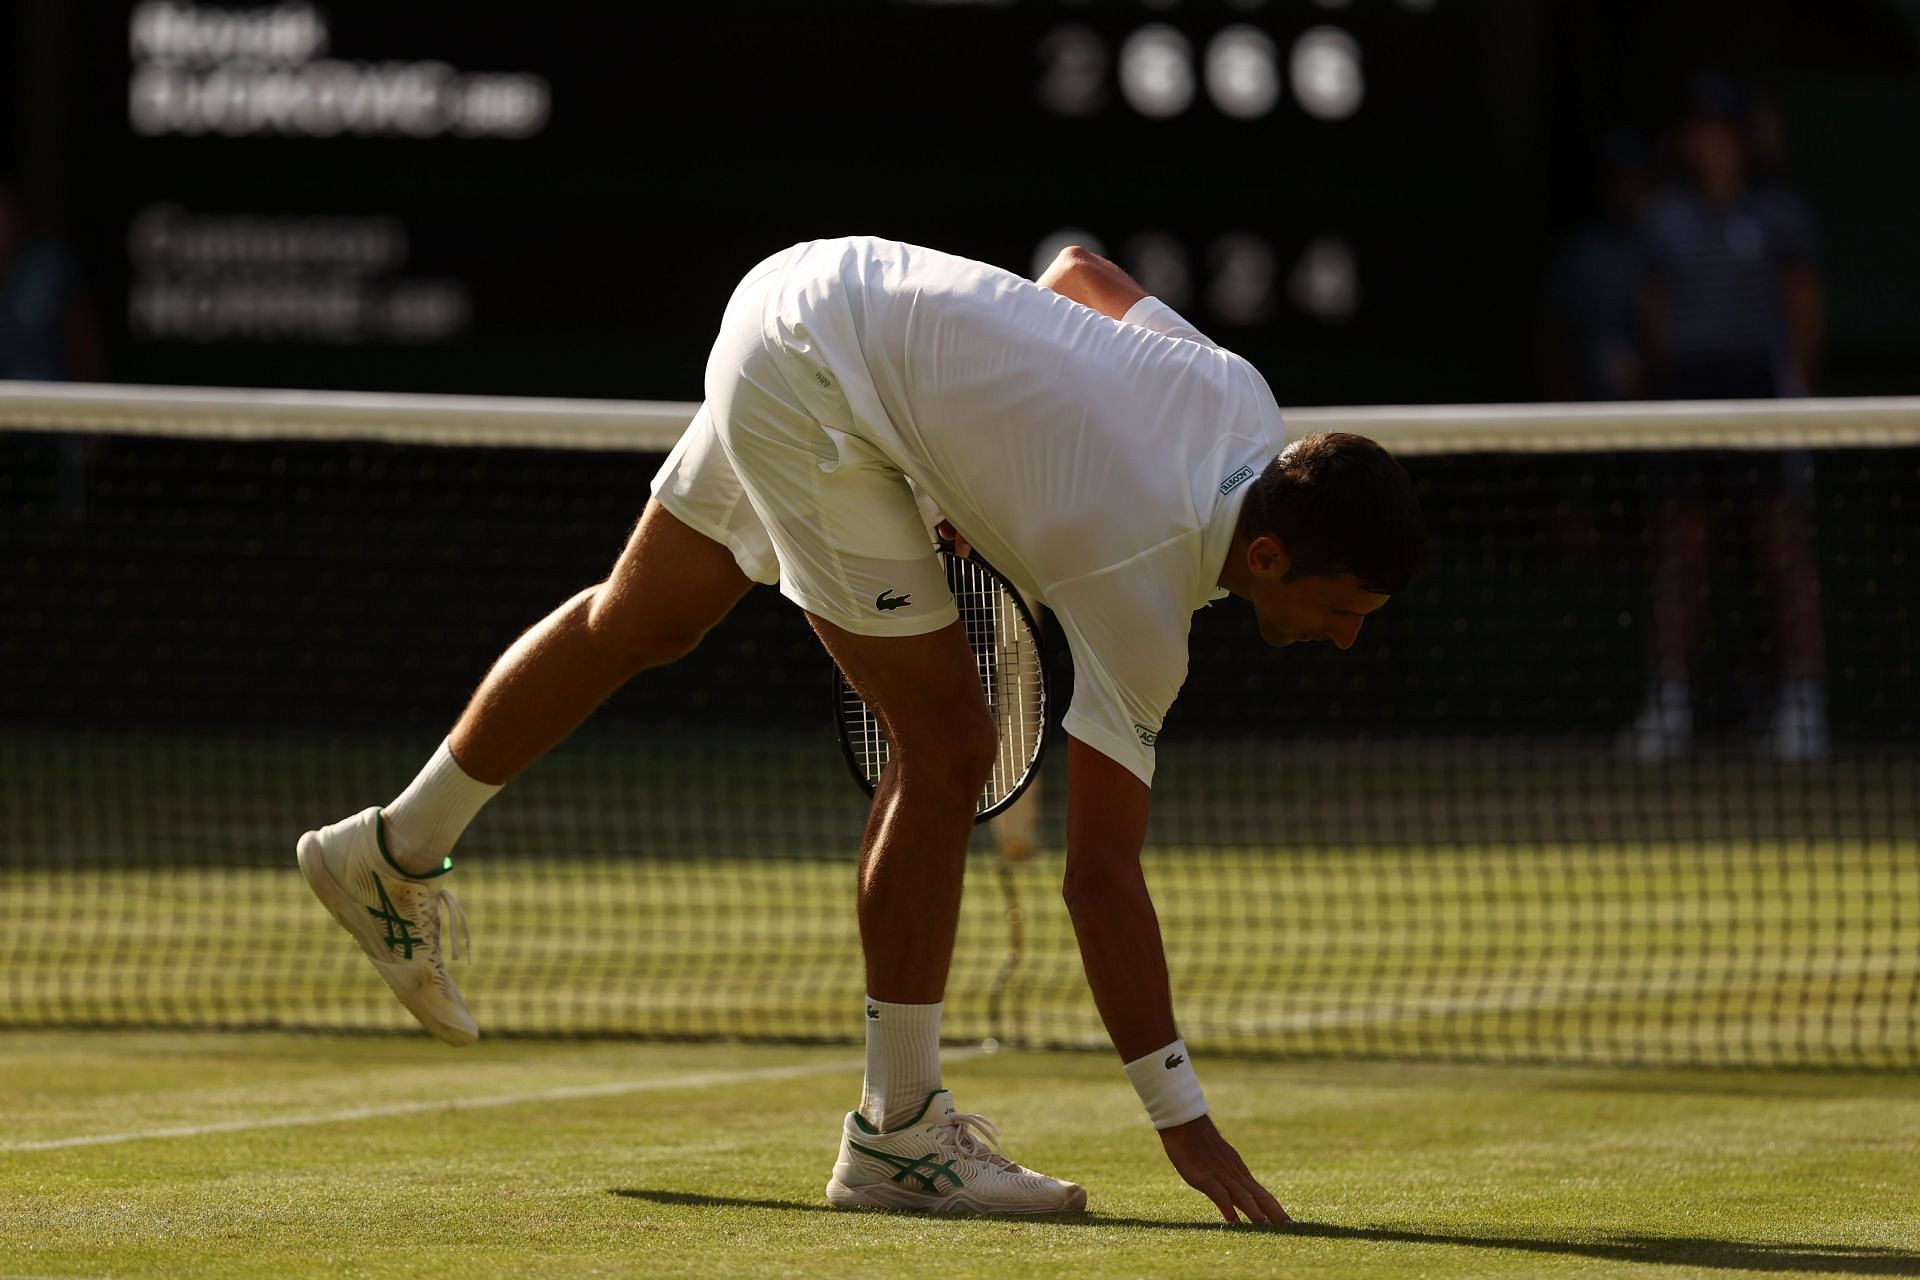 Novak Djokovic touches the Wimbledon grass as he celebrates his match point in the semifinals